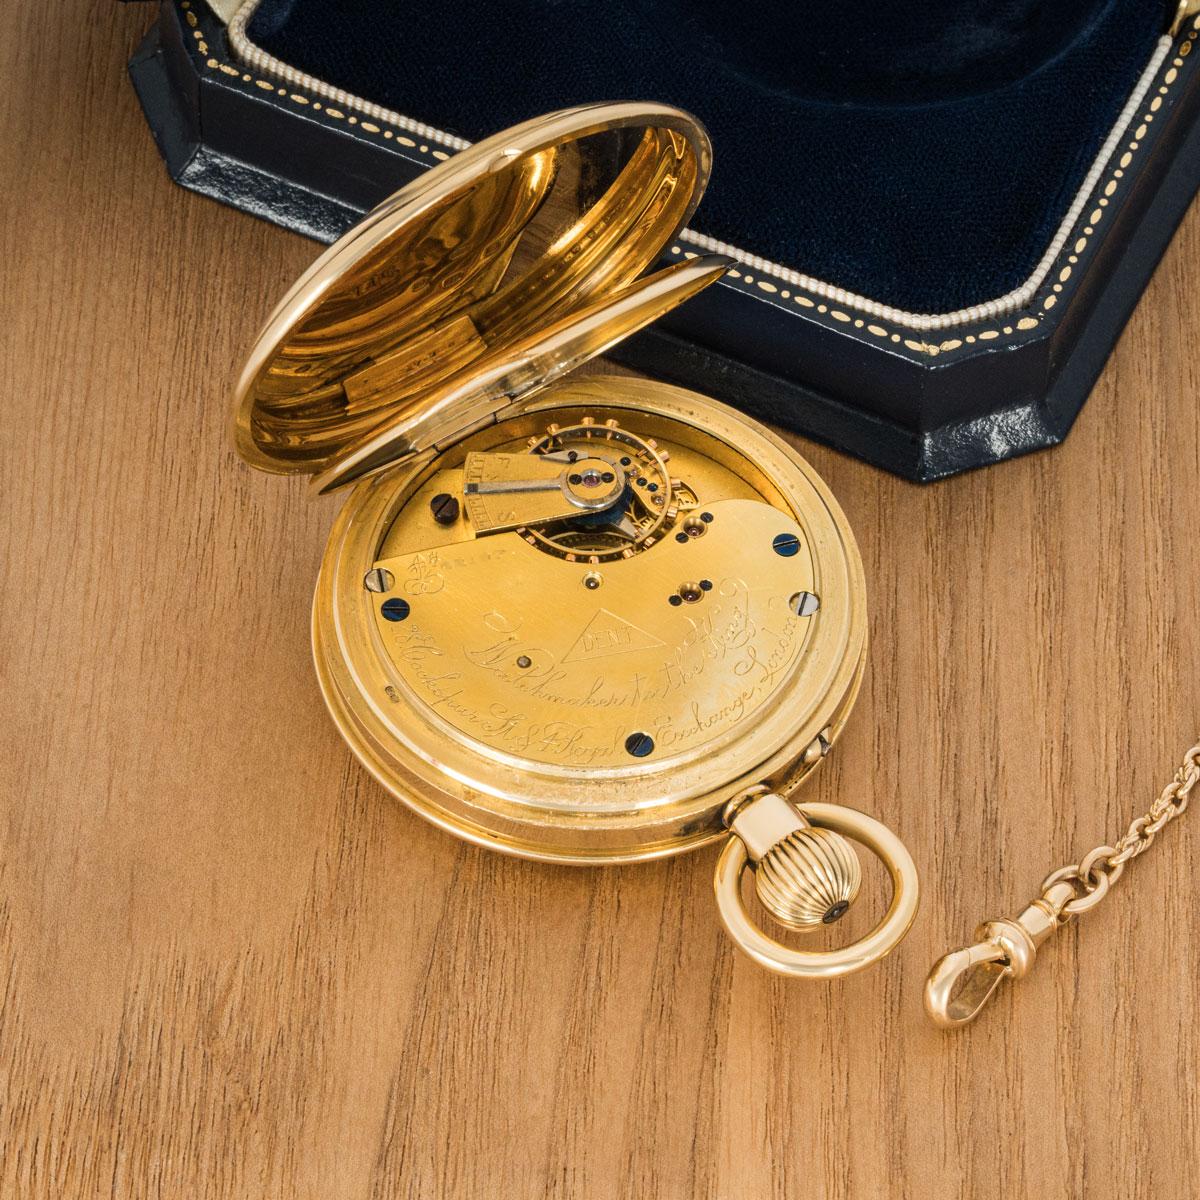 kendal and dent pocket watch